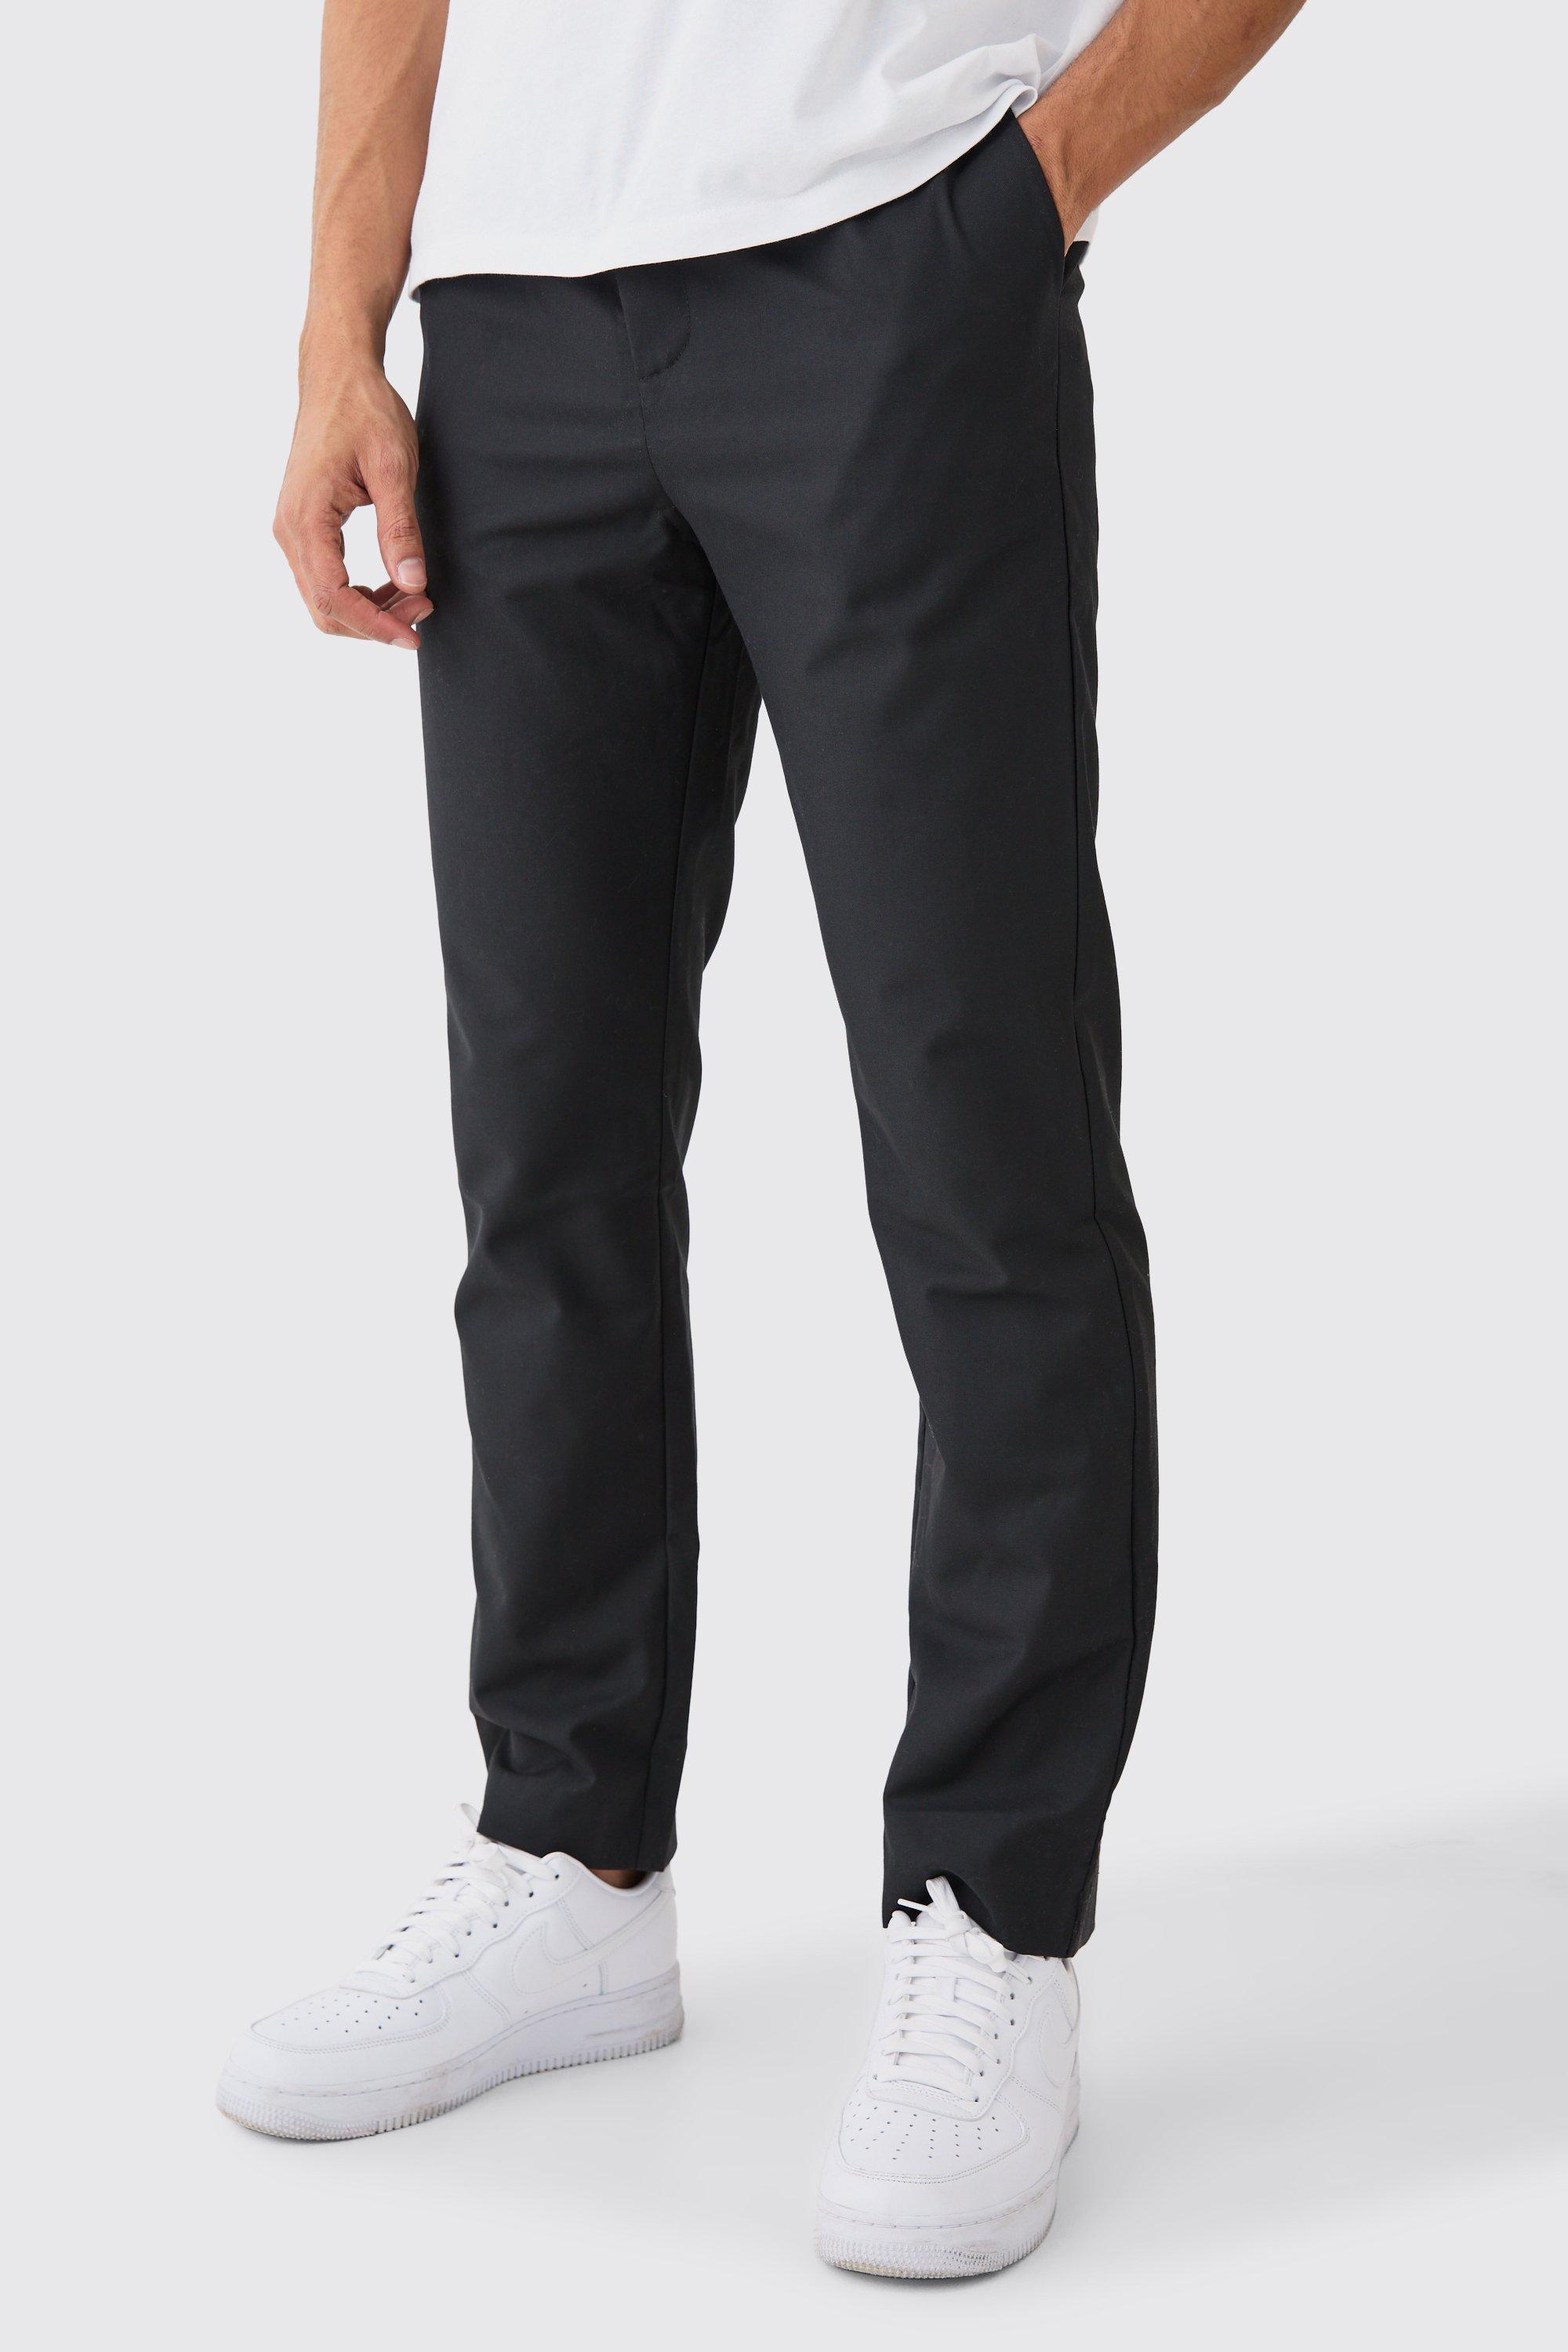 Mens Black Wrap Over Tailored Straight Fit Trousers, Black